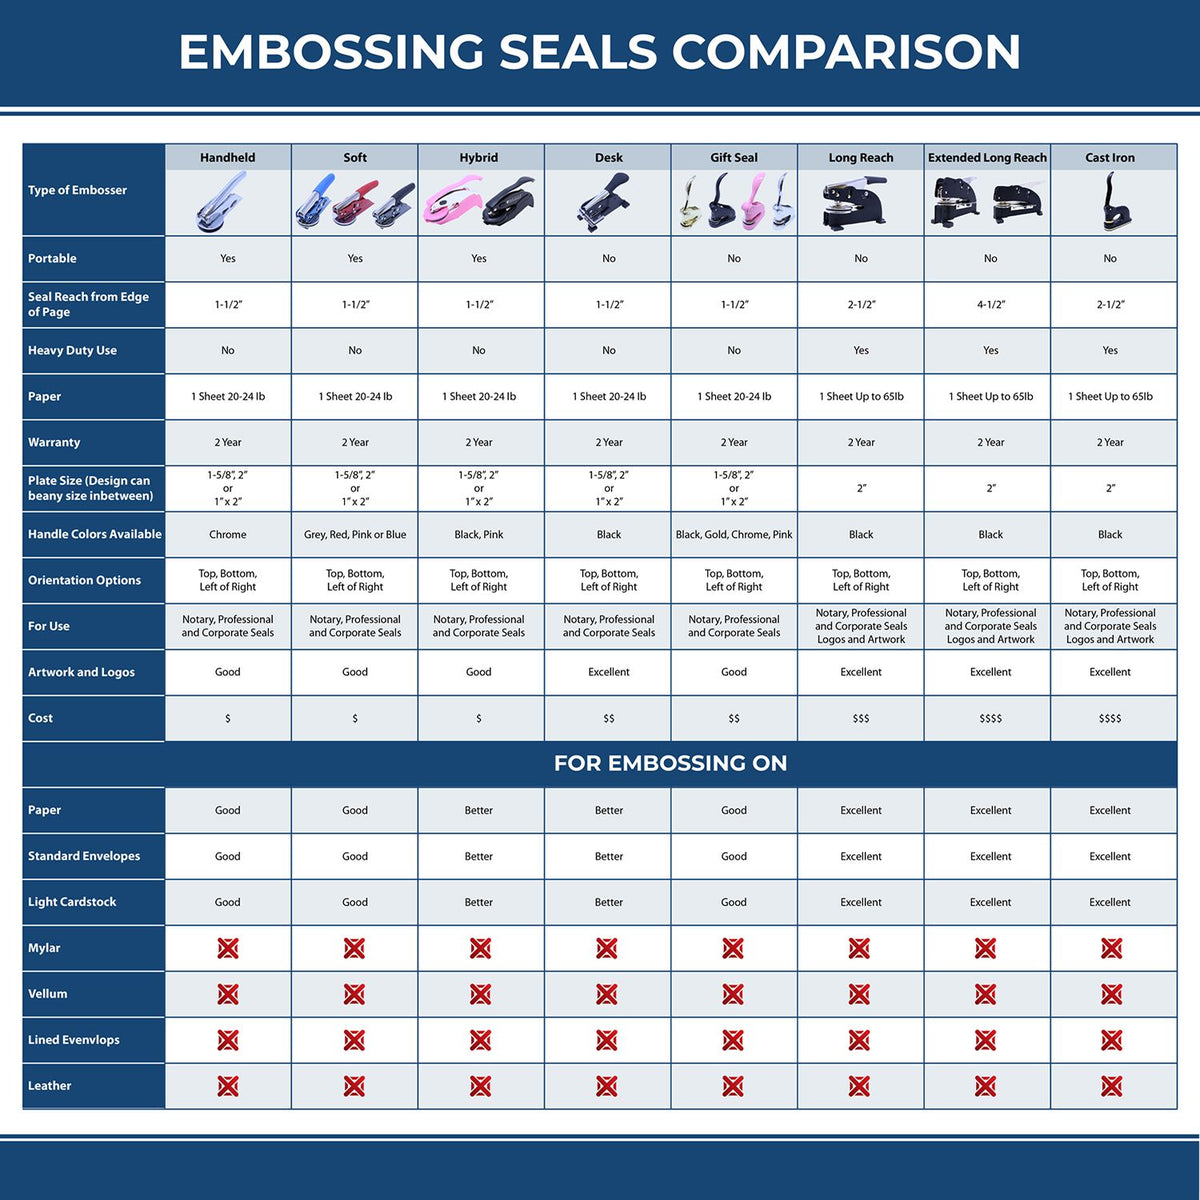 A comparison chart for the different types of mount models available for the Handheld Tennessee Architect Seal Embosser.